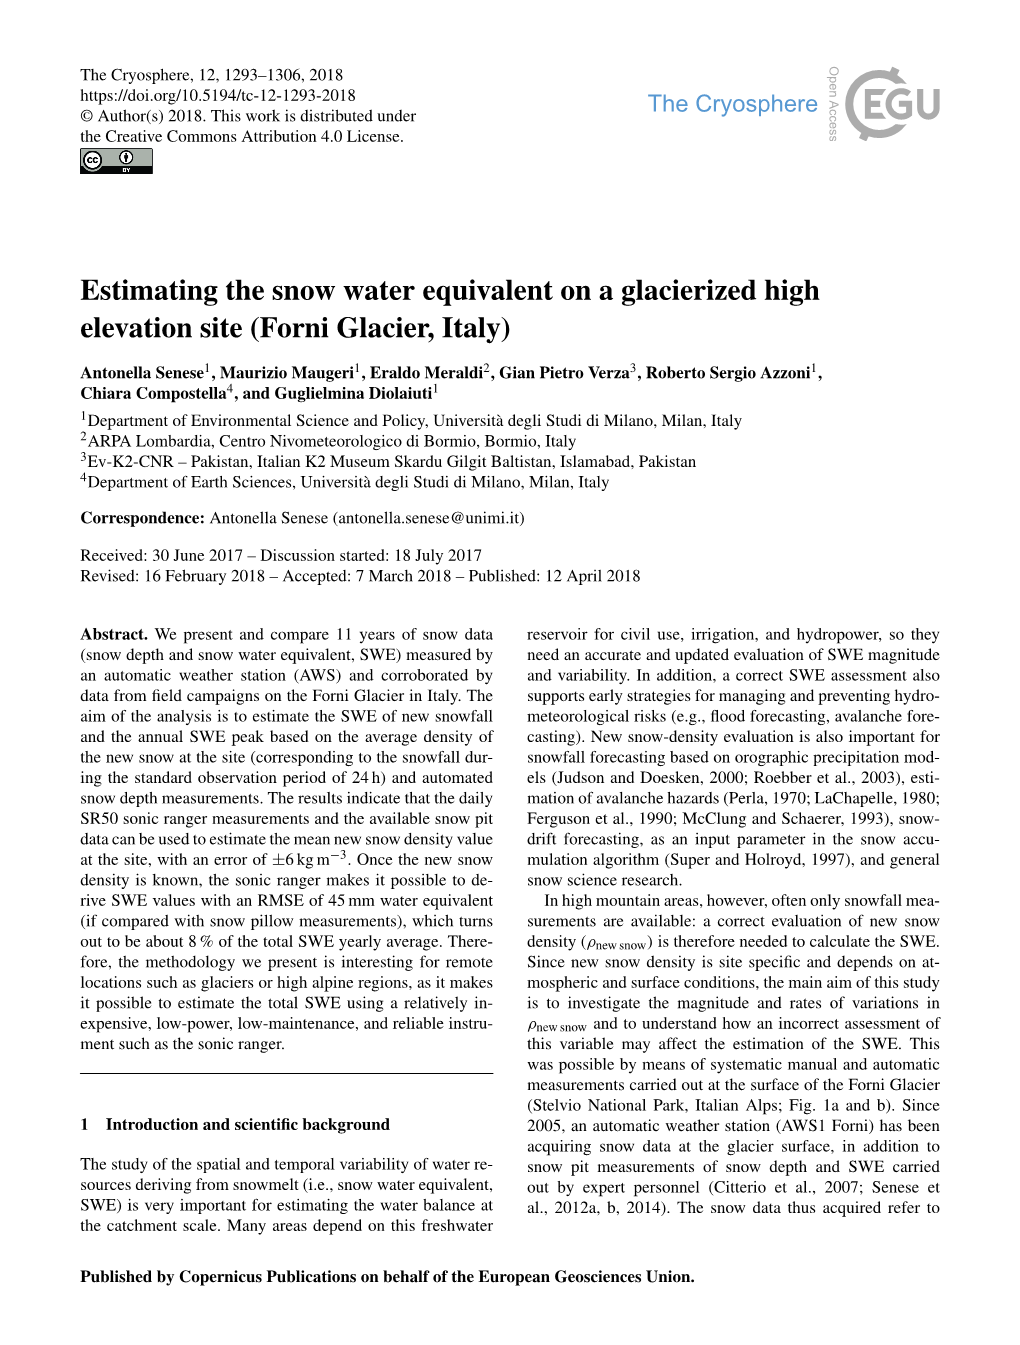 Estimating the Snow Water Equivalent on a Glacierized High Elevation Site (Forni Glacier, Italy)